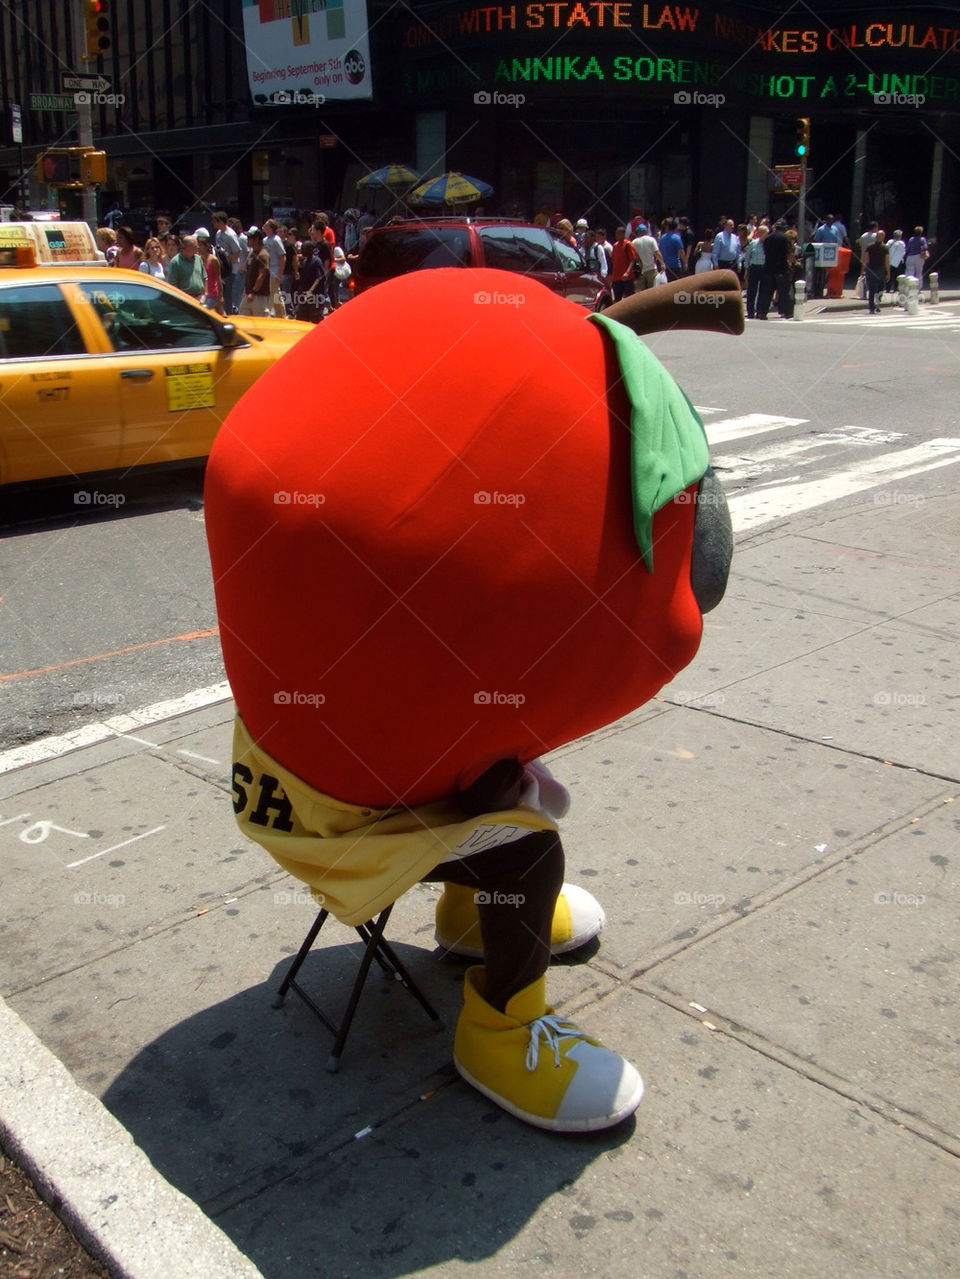 One very sad Apple. Middle of summer in Times Square in the boiling